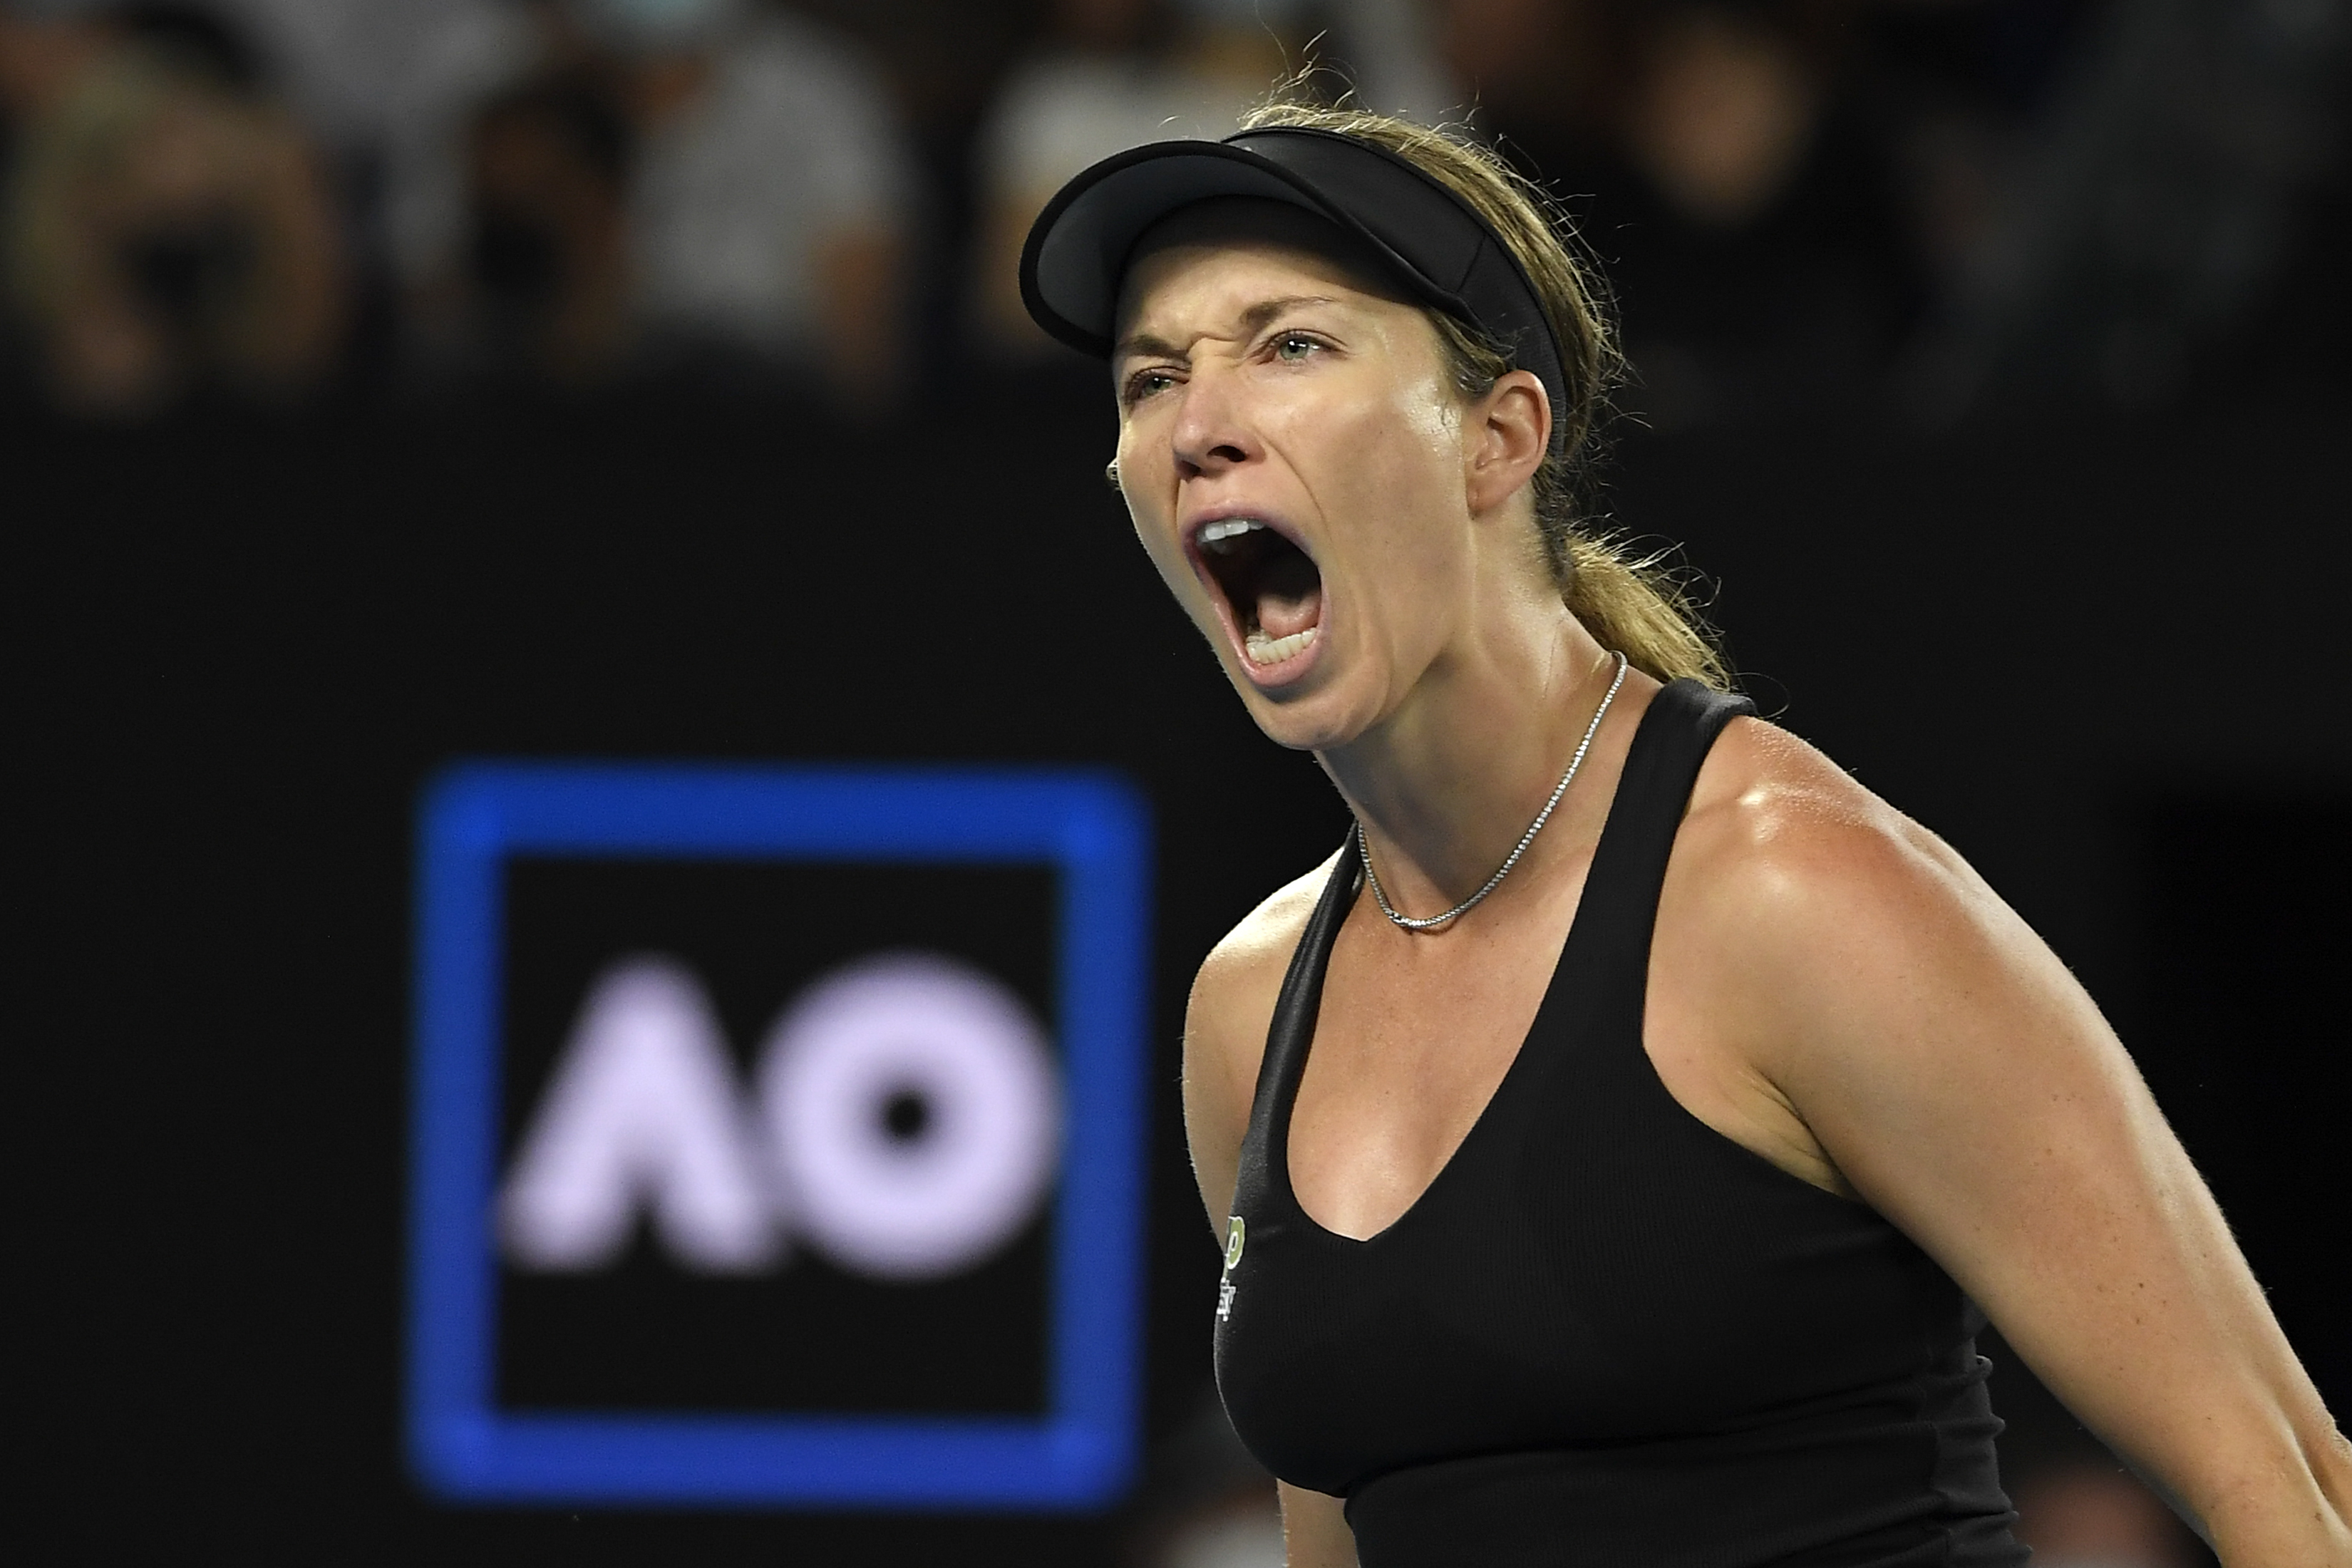 Australian Open 2022 Danielle Collins blows up at Melbourne Park crowd during stunning resurgence from Ash Barty during womens singles finals